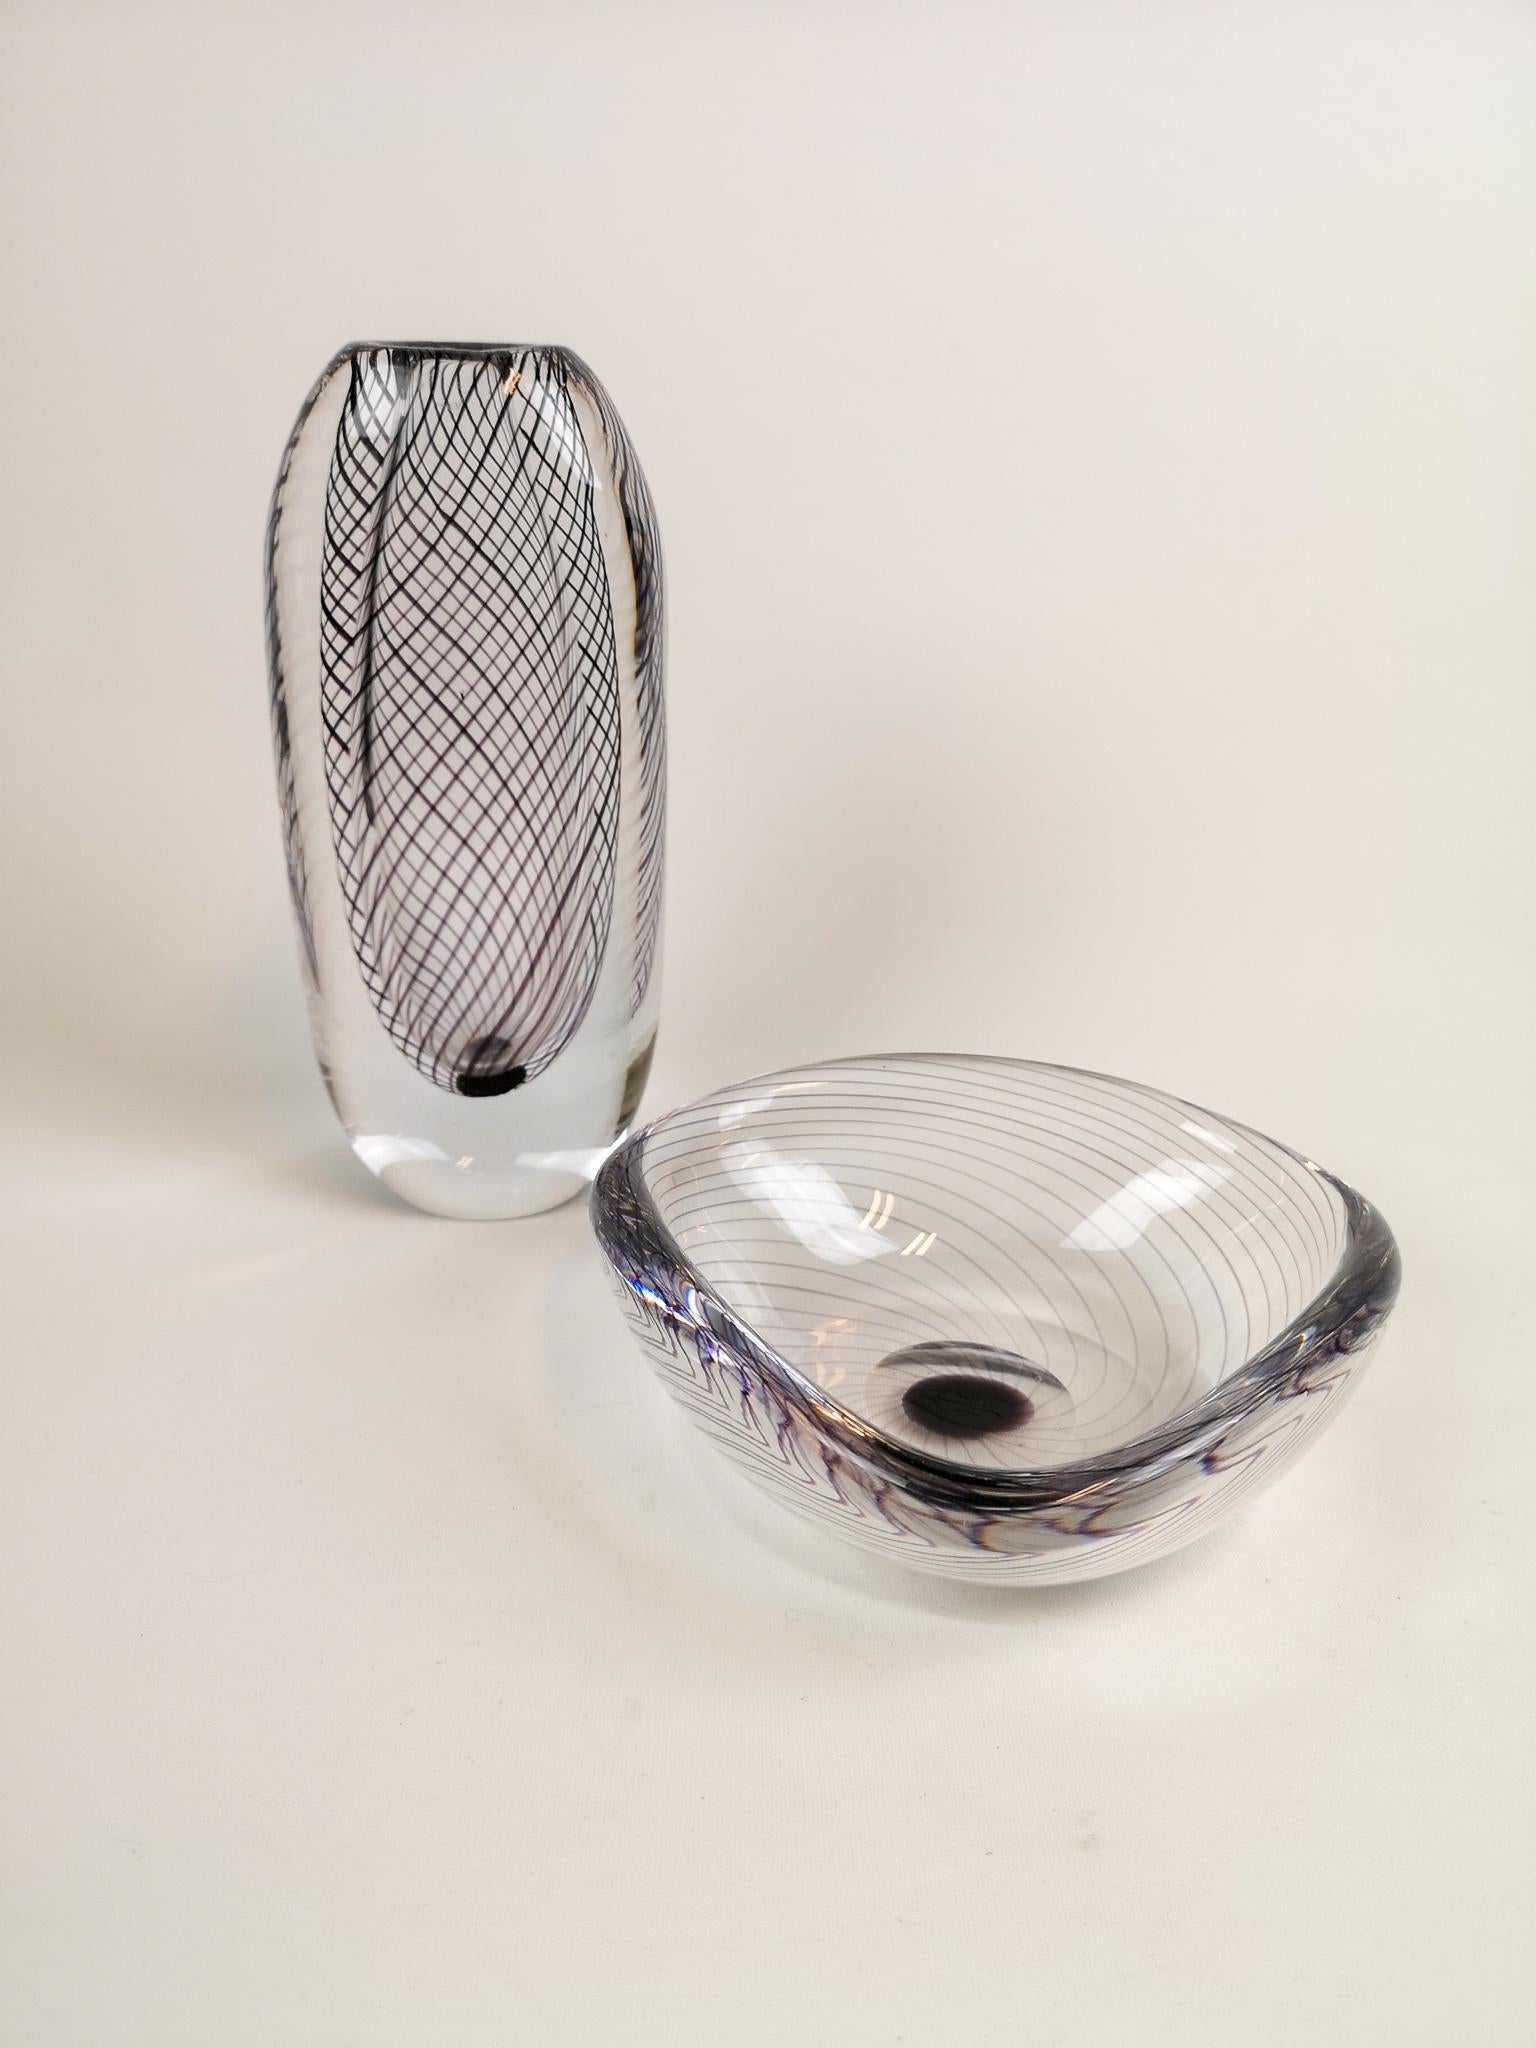 A set of one art vase and one bowl produced in Sweden at the Kosta factory. Designed by Vicke Lindstrand. 
The pieces are made of clear glass with black (aventurine) glass threads.

Signed on the floor with 